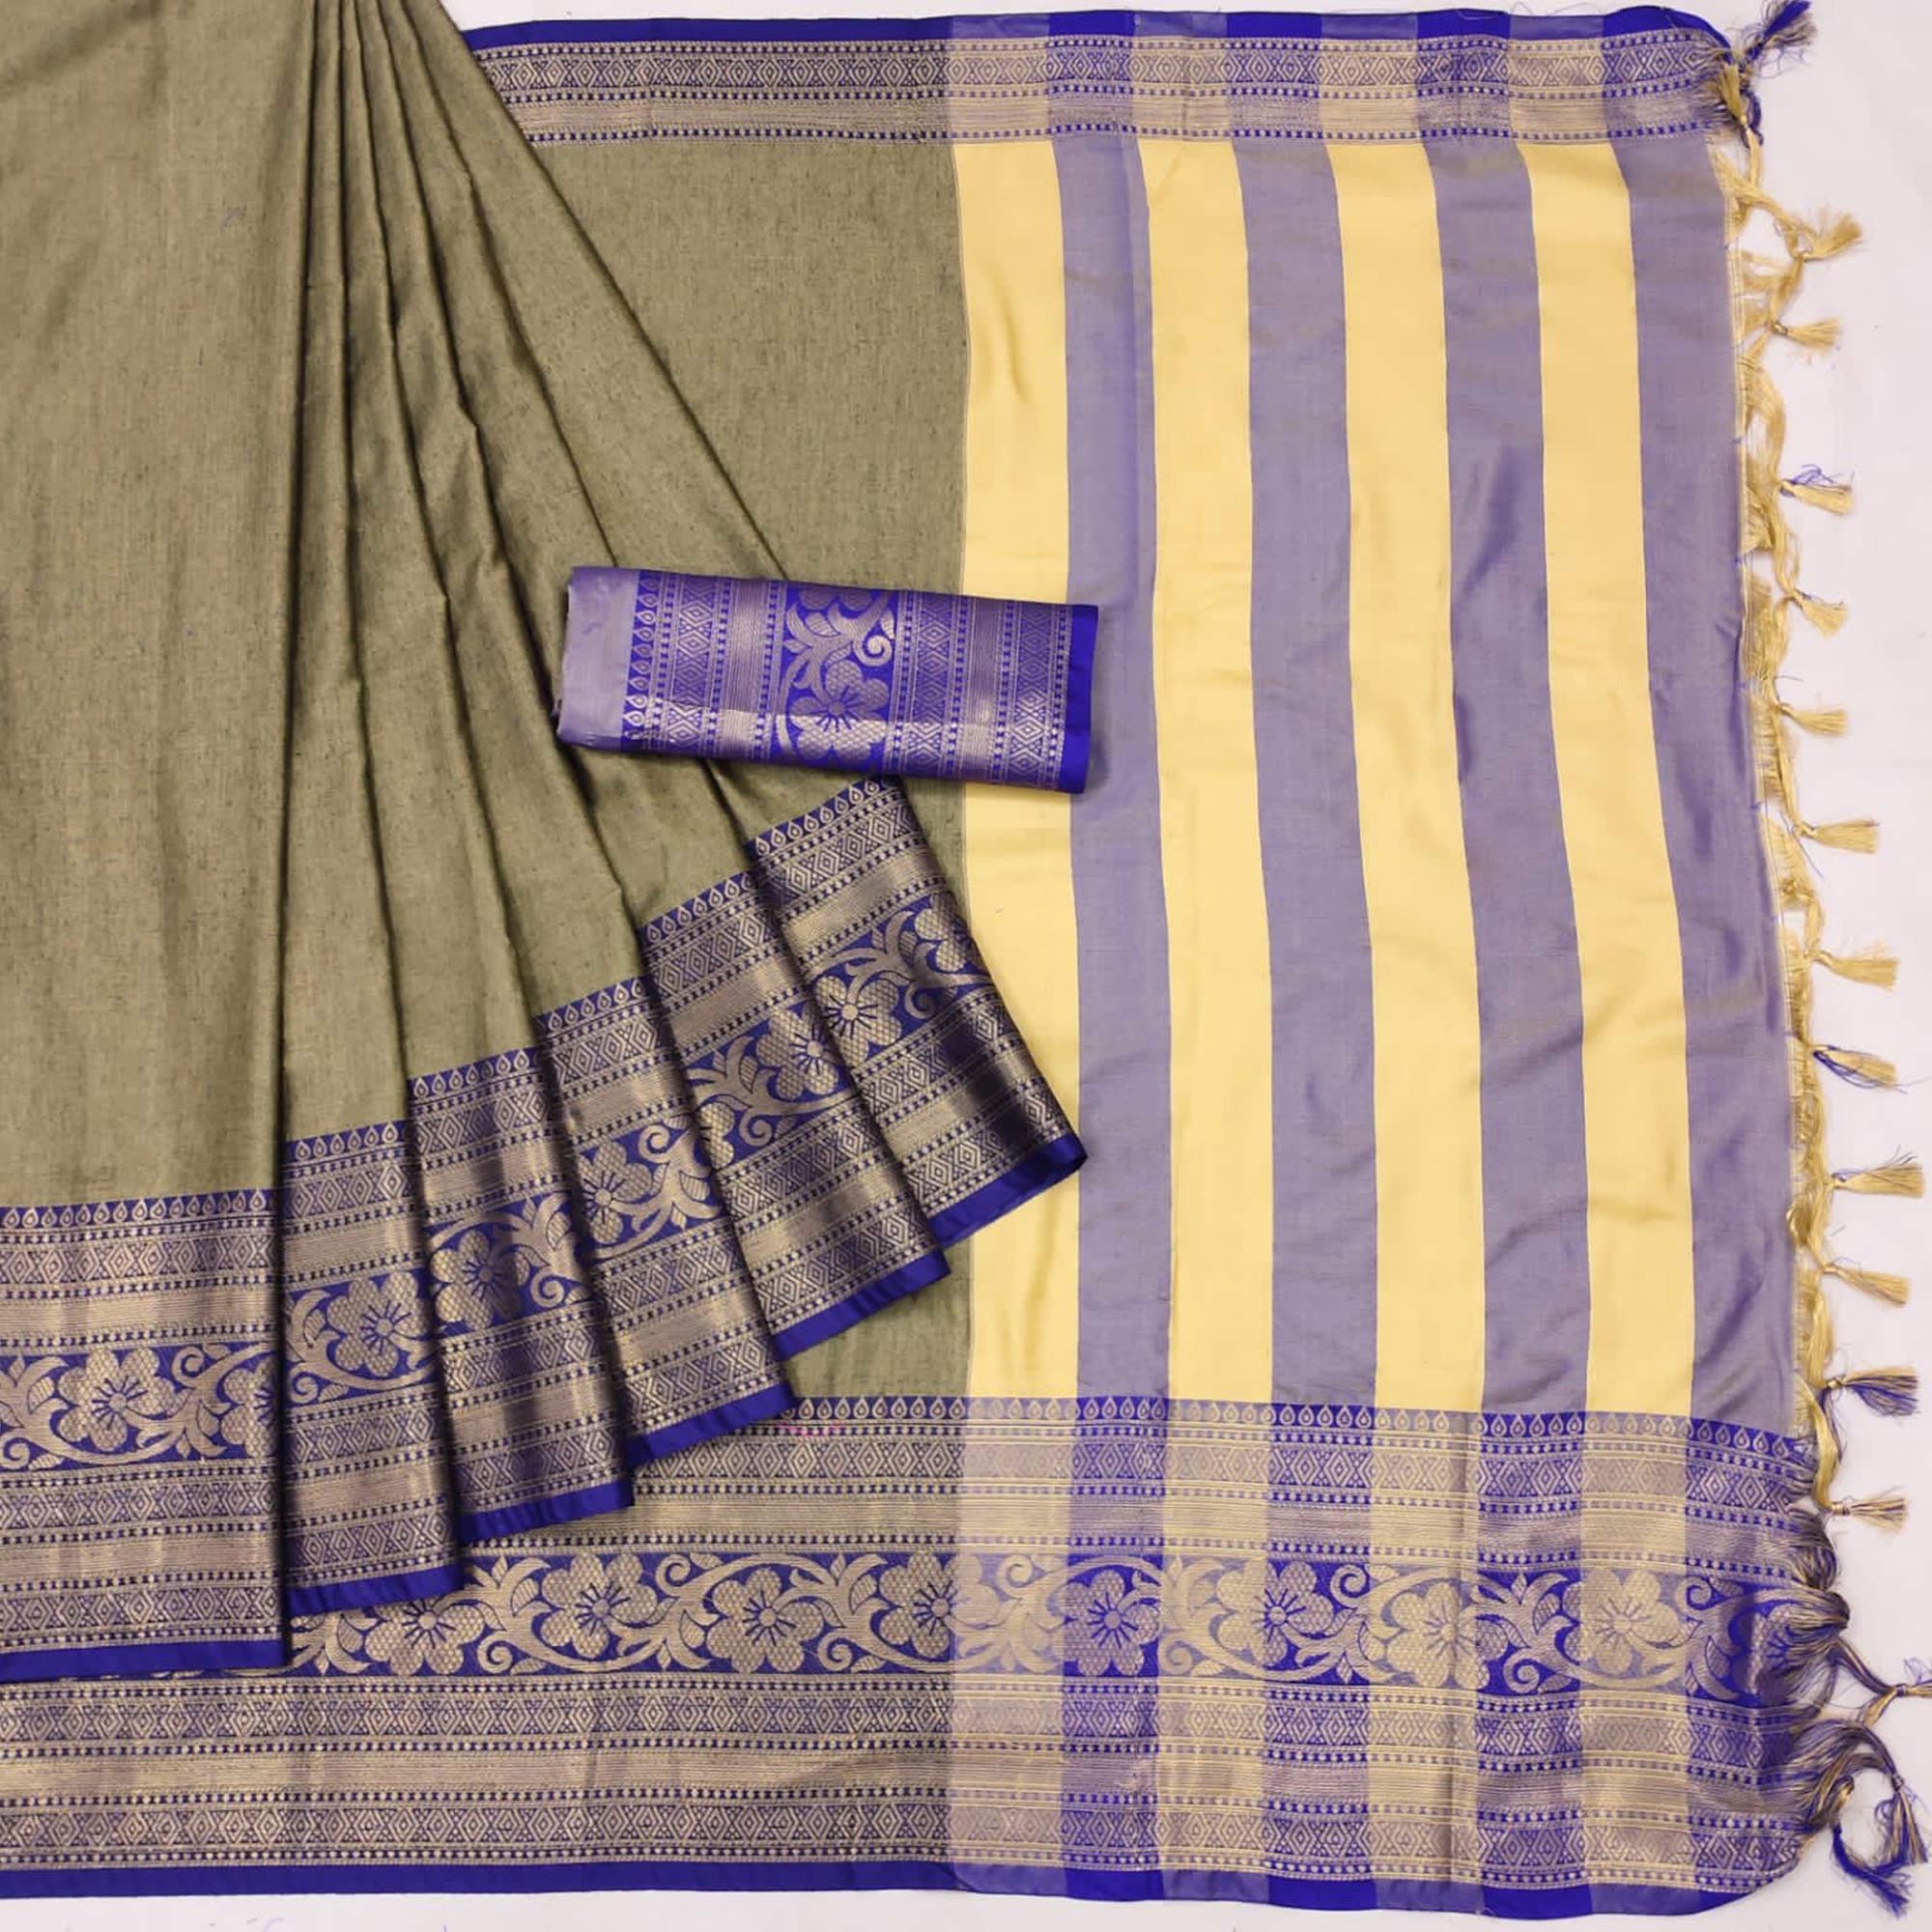 Chikoo Floral Woven Cotton Silk Saree With Tassels